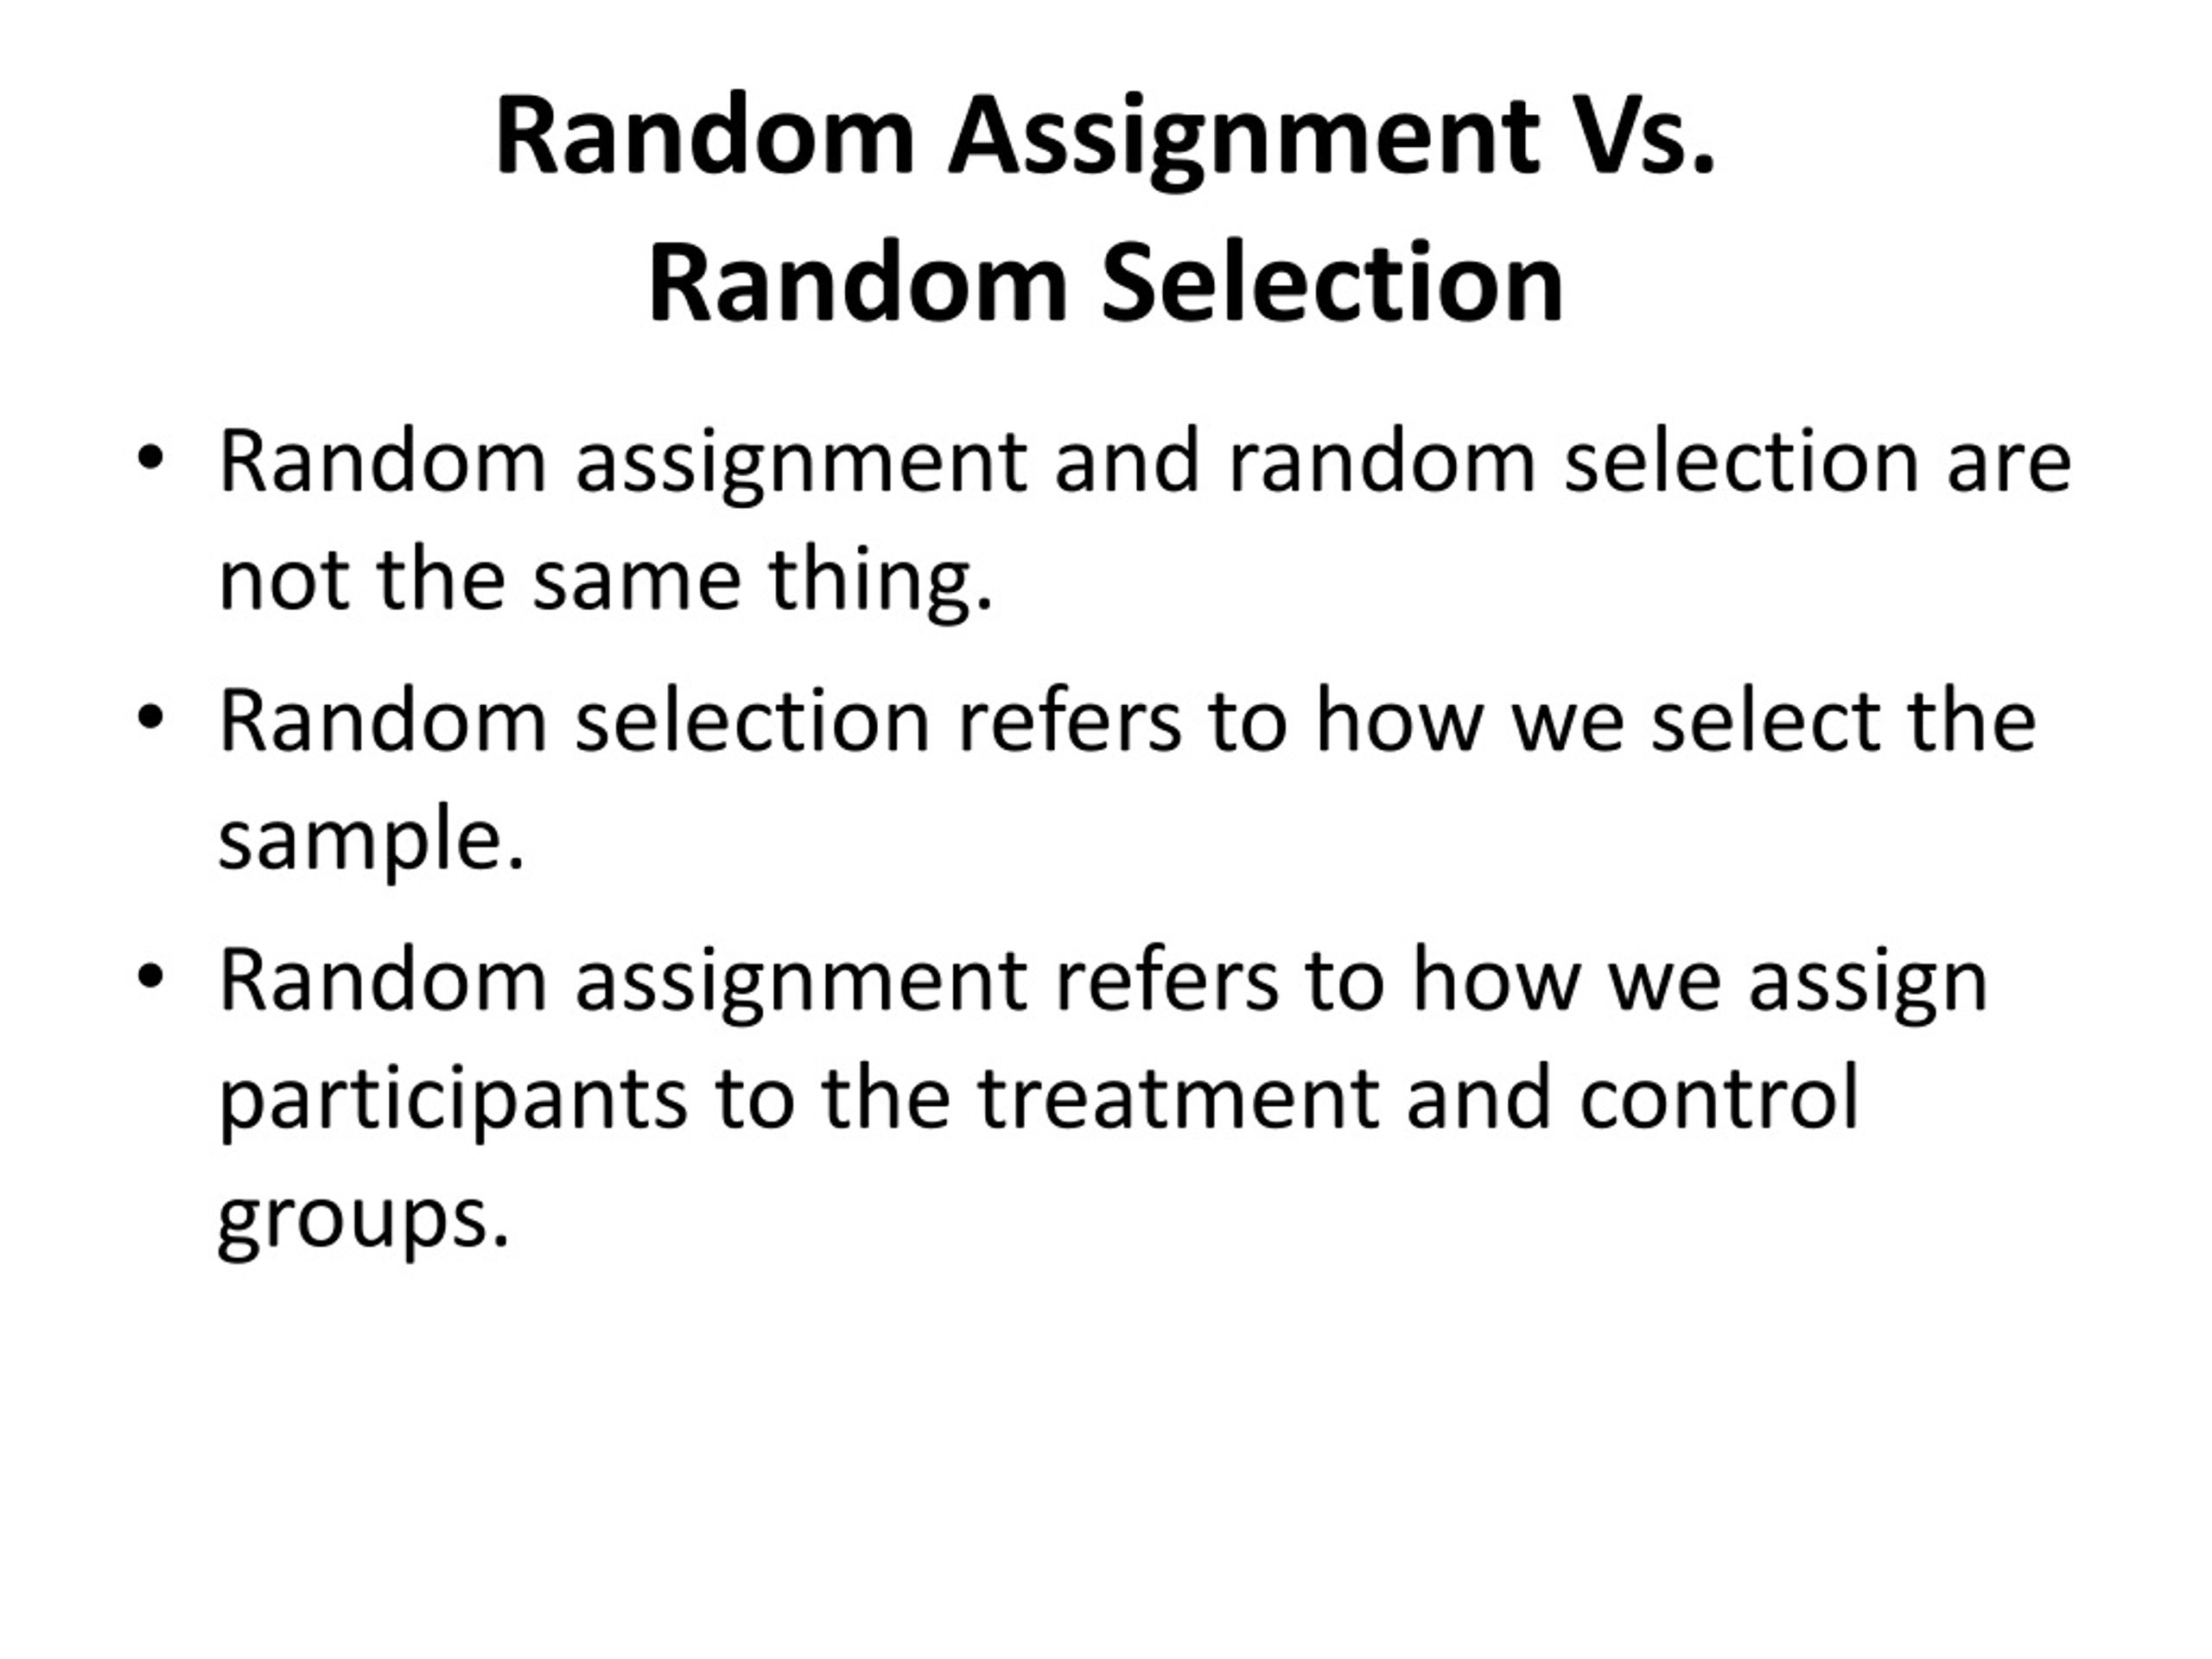 how are random assignment and random selection different